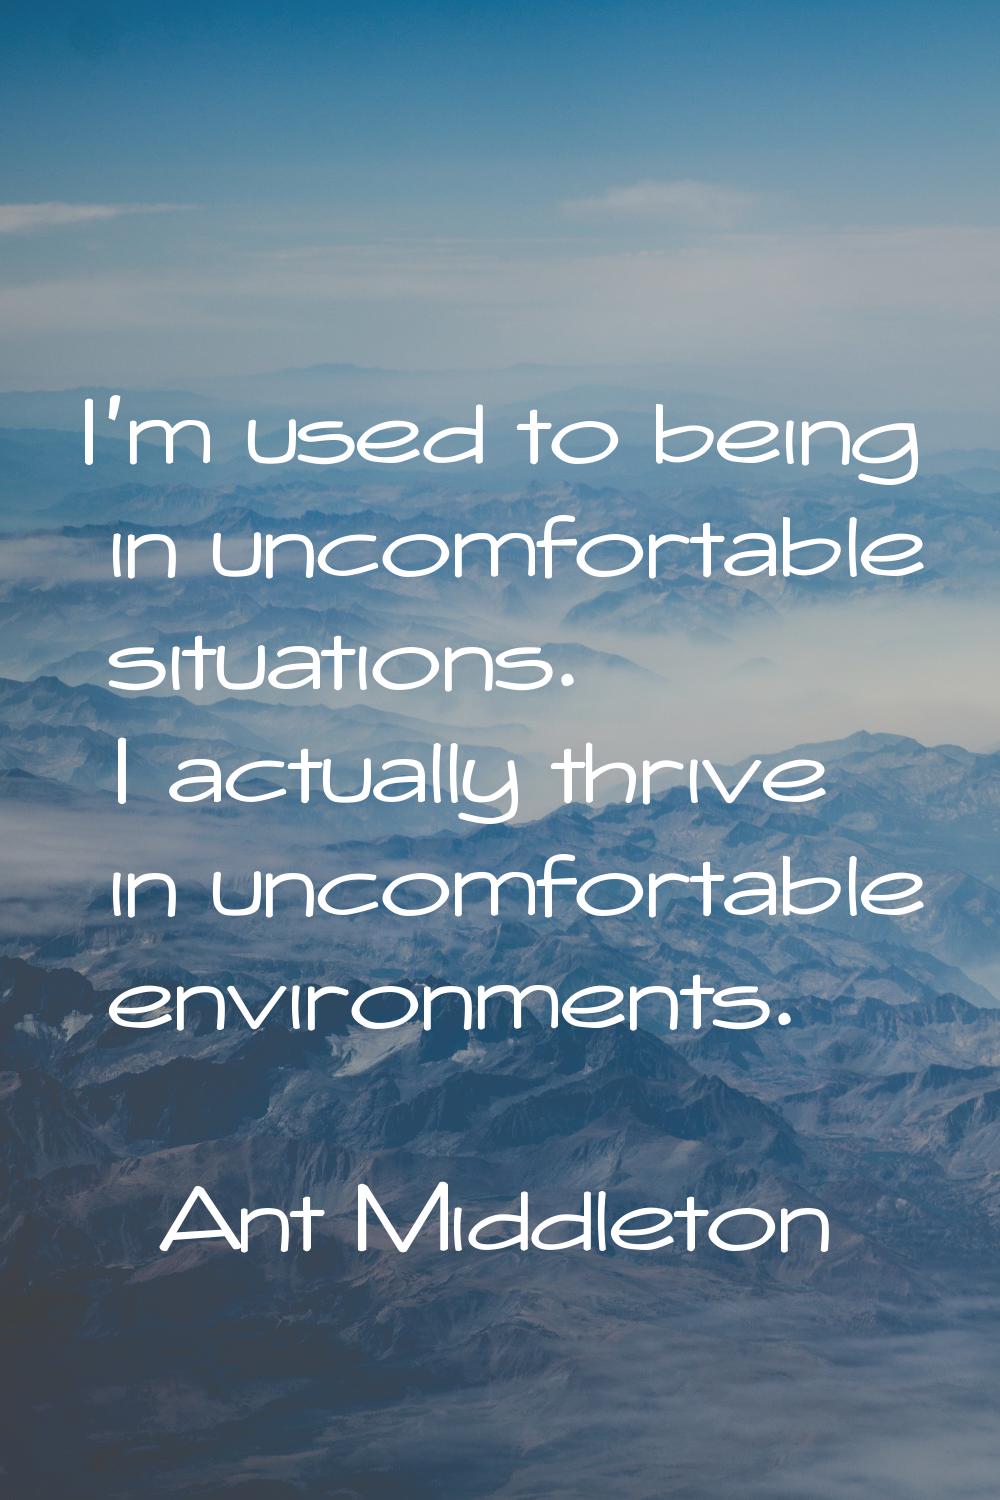 I'm used to being in uncomfortable situations. I actually thrive in uncomfortable environments.